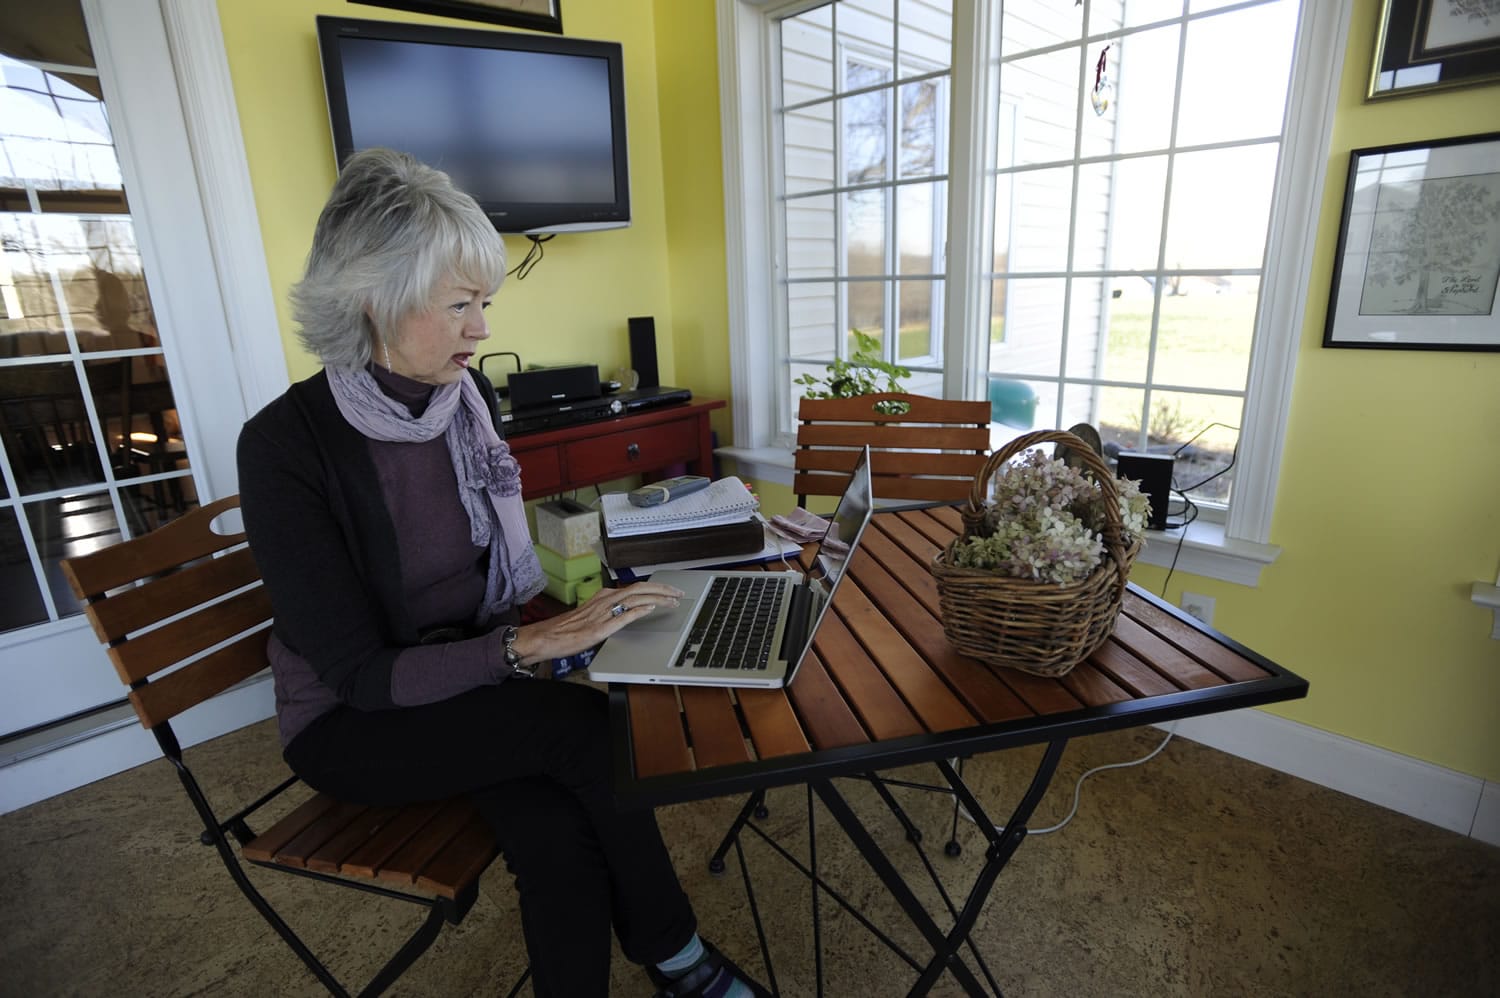 Terri Roberts, mother of Charles Carl Roberts IV, the gunman in the Nickel Mines Amish schoolhouse massacre, works on her computer at her home in Strasburg, Pa.